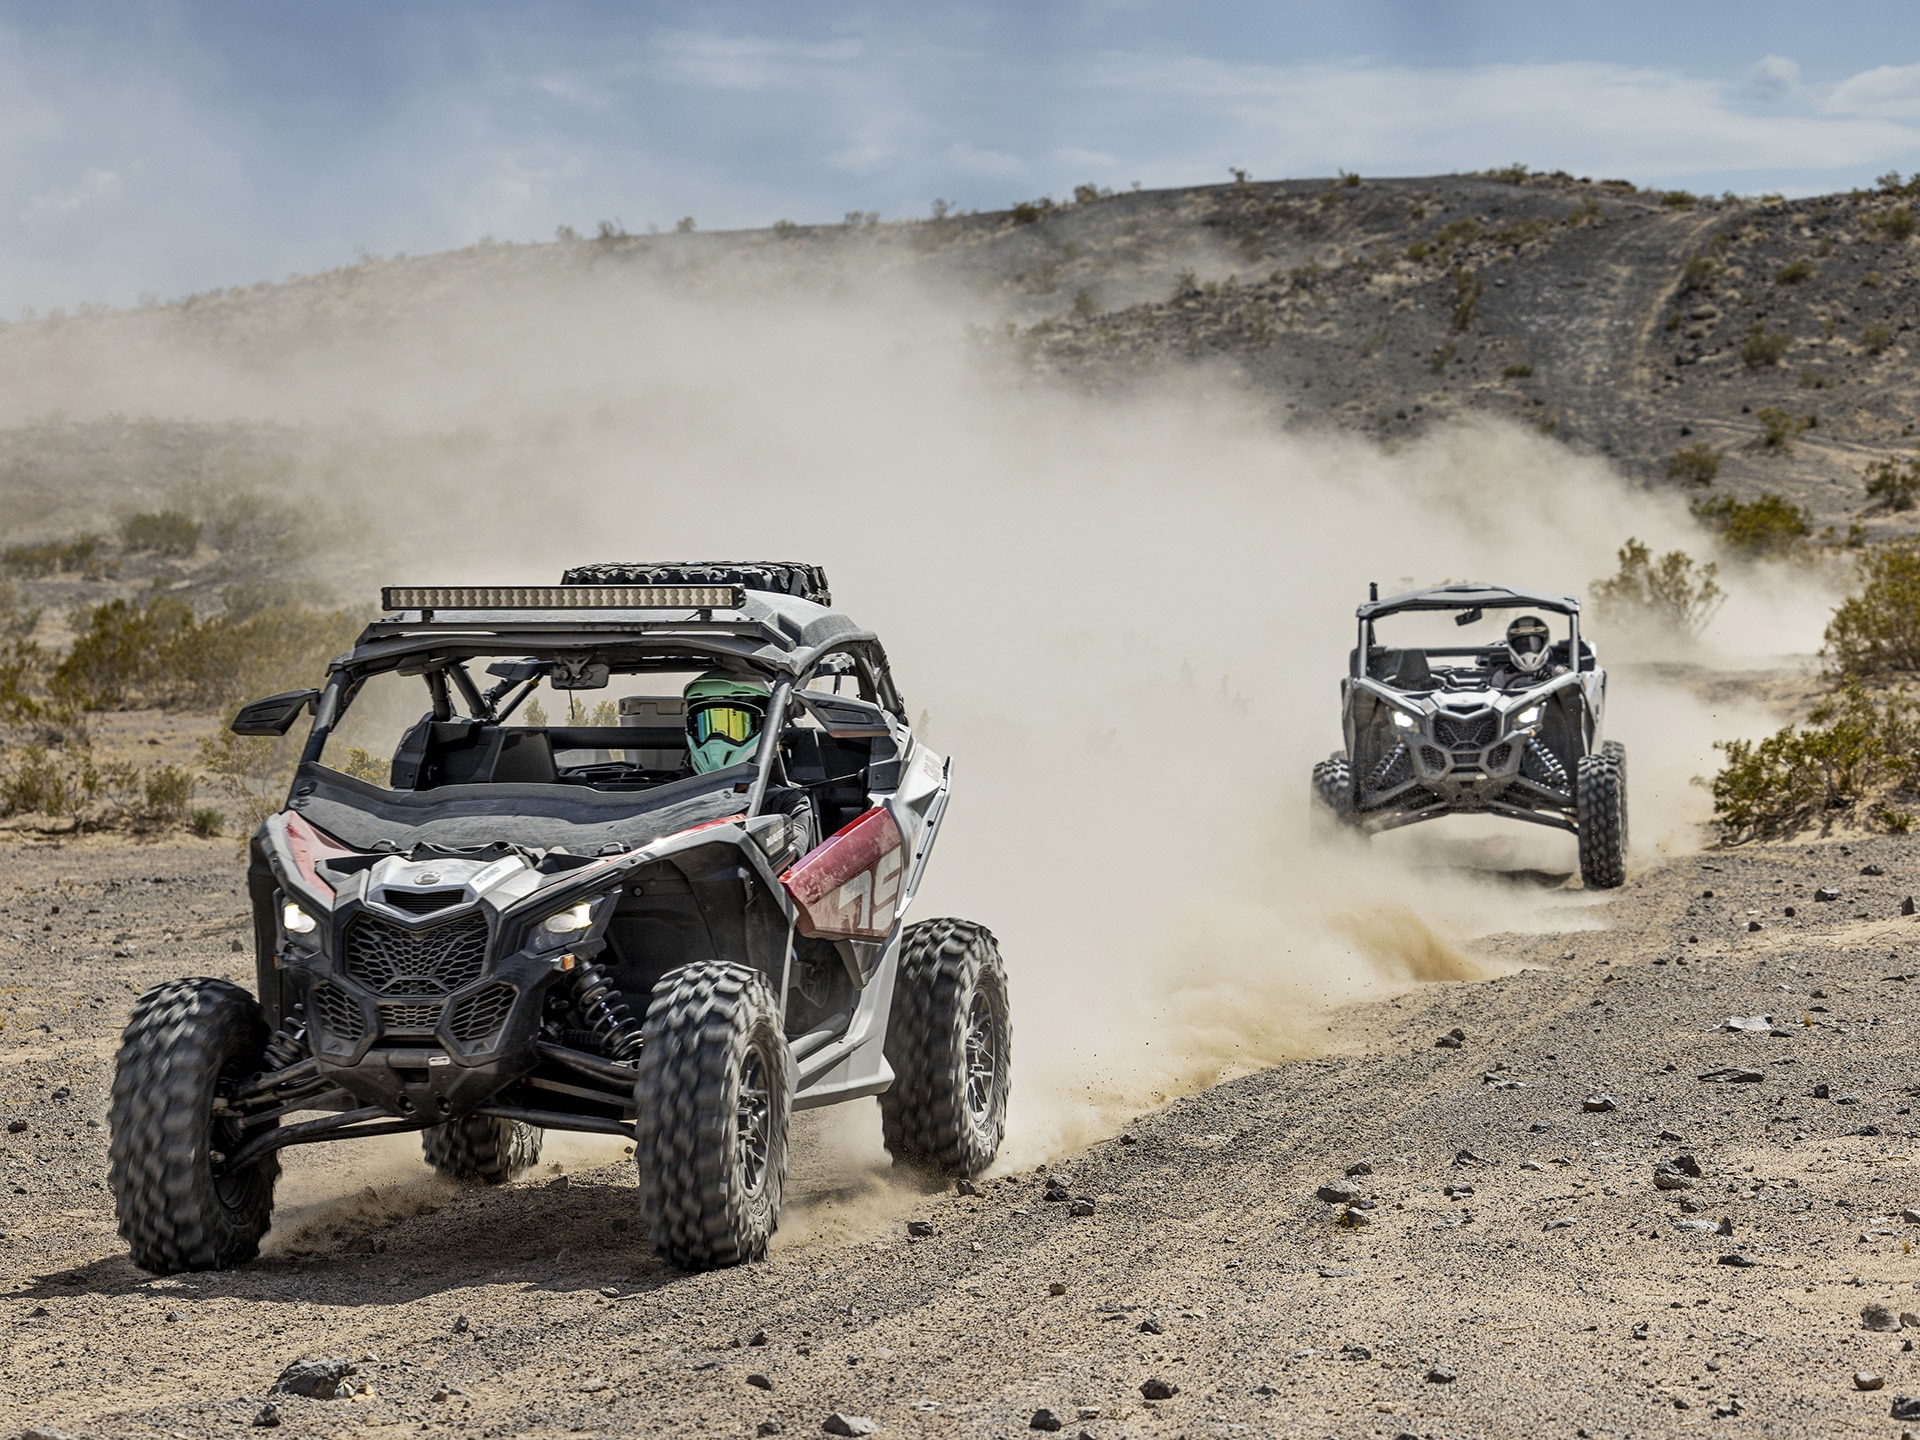 Two Can-Am side-by-side vehicles riding on a dirt road